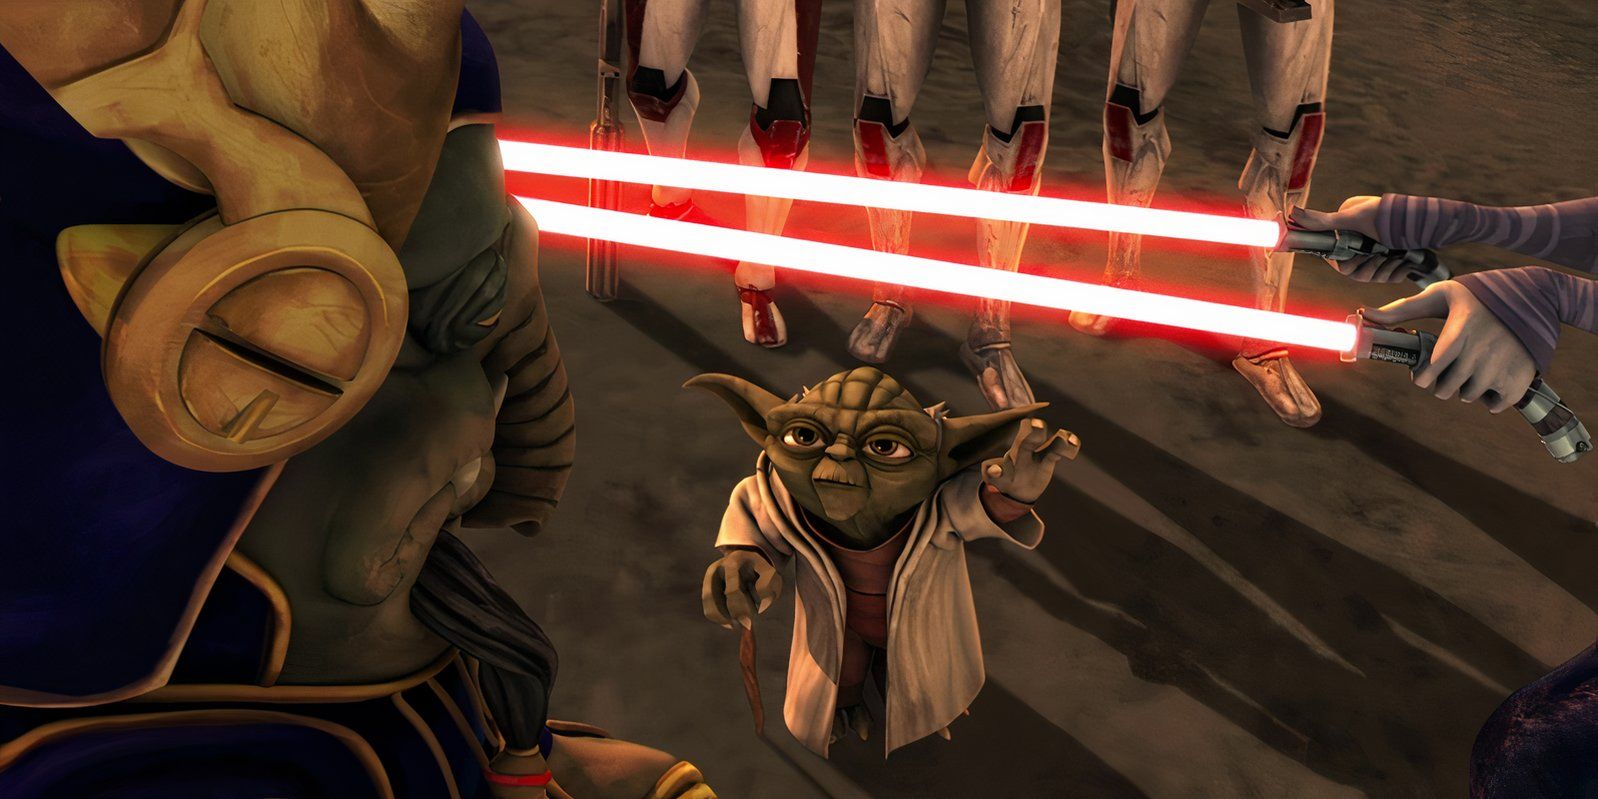 Yoda holds Asajj Ventress' lightsabers in place using Force stasis while speaking to King Katuunko in Star Wars: The Clone Wars season 1 episode 1